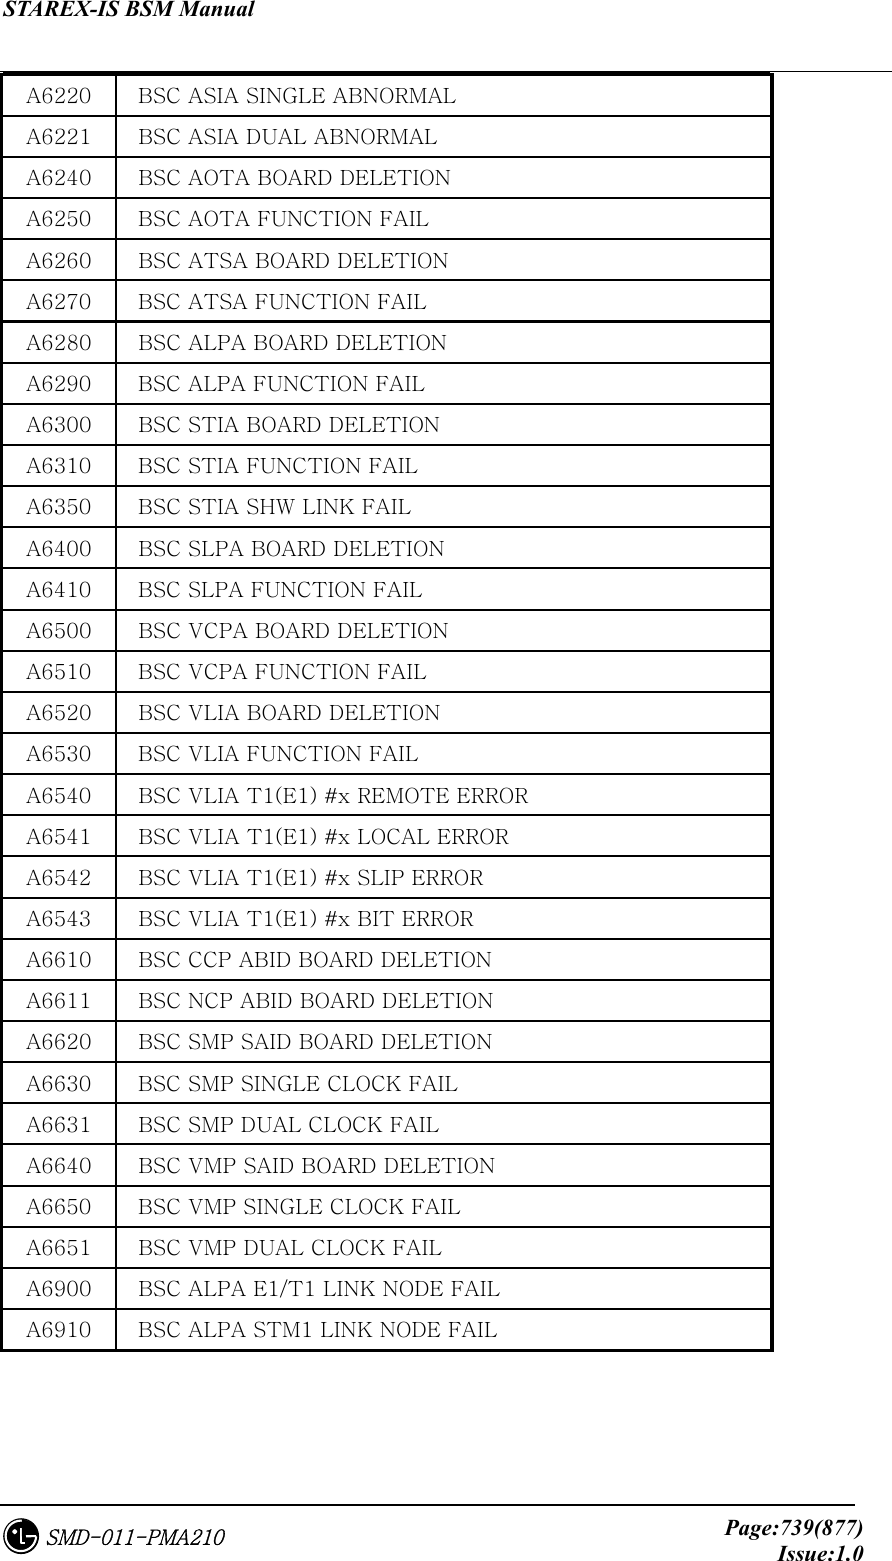 STAREX-IS BSM Manual     Page:739(877)Issue:1.0SMD-011-PMA210 A6220  BSC ASIA SINGLE ABNORMAL A6221  BSC ASIA DUAL ABNORMAL A6240  BSC AOTA BOARD DELETION A6250  BSC AOTA FUNCTION FAIL A6260  BSC ATSA BOARD DELETION A6270  BSC ATSA FUNCTION FAIL A6280  BSC ALPA BOARD DELETION A6290  BSC ALPA FUNCTION FAIL A6300  BSC STIA BOARD DELETION A6310  BSC STIA FUNCTION FAIL A6350  BSC STIA SHW LINK FAIL A6400  BSC SLPA BOARD DELETION A6410  BSC SLPA FUNCTION FAIL A6500  BSC VCPA BOARD DELETION A6510  BSC VCPA FUNCTION FAIL A6520  BSC VLIA BOARD DELETION A6530  BSC VLIA FUNCTION FAIL A6540  BSC VLIA T1(E1) #x REMOTE ERROR A6541  BSC VLIA T1(E1) #x LOCAL ERROR A6542  BSC VLIA T1(E1) #x SLIP ERROR A6543  BSC VLIA T1(E1) #x BIT ERROR A6610  BSC CCP ABID BOARD DELETION A6611  BSC NCP ABID BOARD DELETION A6620  BSC SMP SAID BOARD DELETION A6630  BSC SMP SINGLE CLOCK FAIL A6631  BSC SMP DUAL CLOCK FAIL A6640  BSC VMP SAID BOARD DELETION A6650  BSC VMP SINGLE CLOCK FAIL A6651  BSC VMP DUAL CLOCK FAIL A6900  BSC ALPA E1/T1 LINK NODE FAIL A6910  BSC ALPA STM1 LINK NODE FAIL    